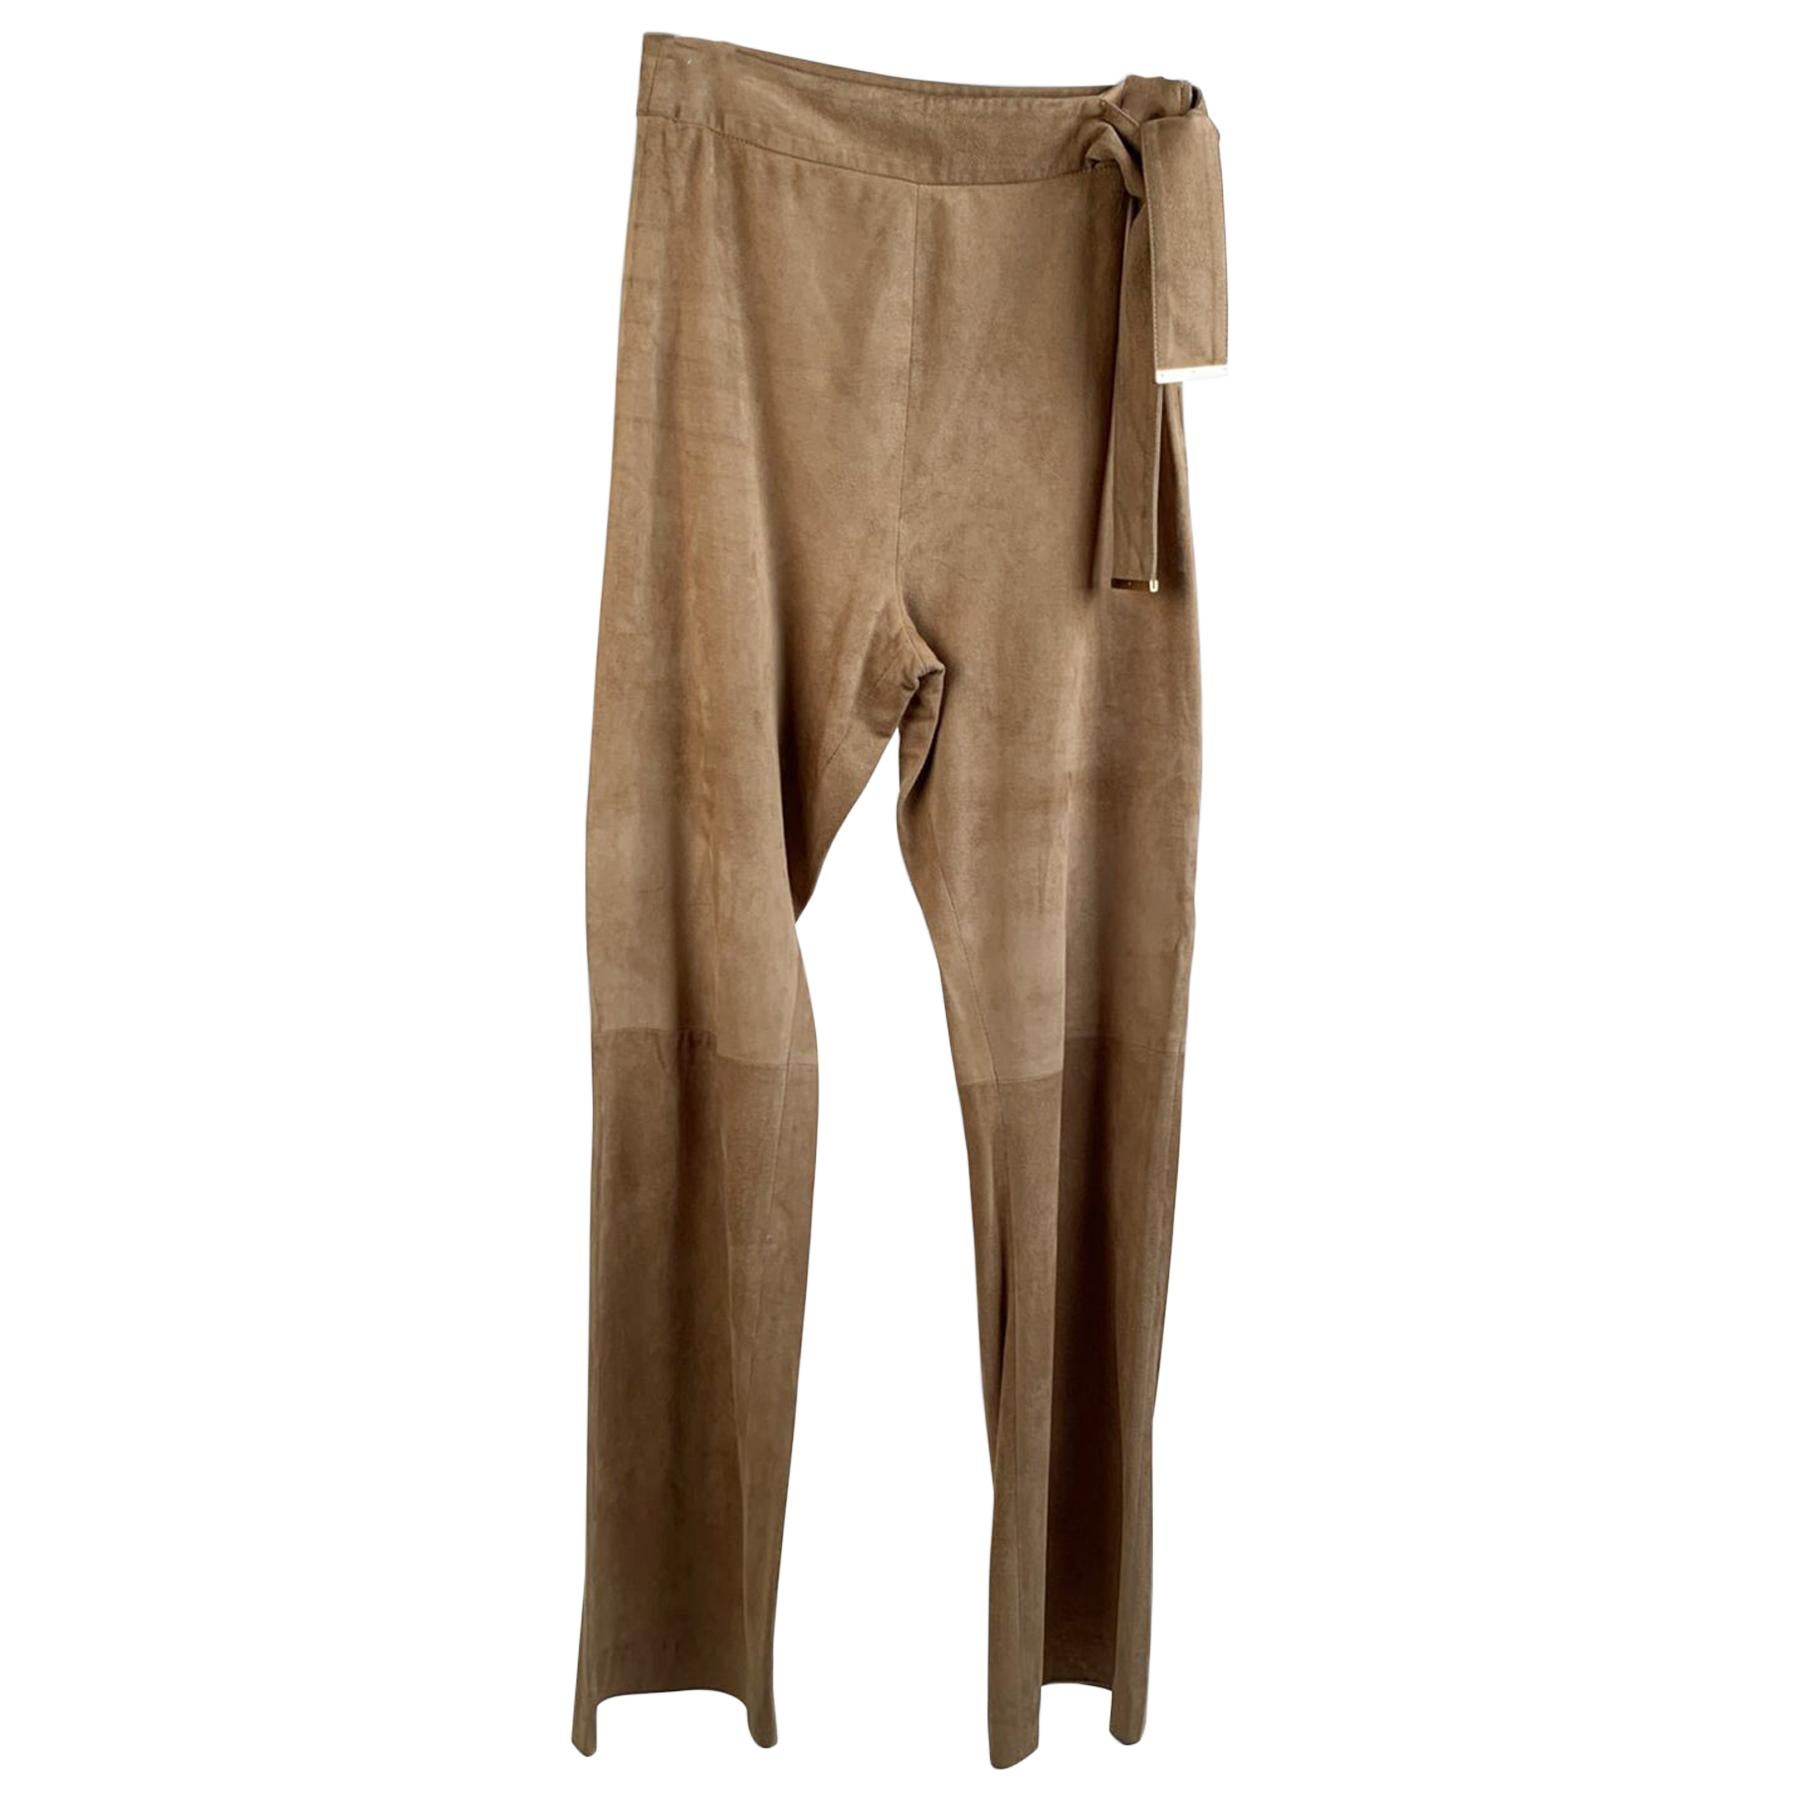 Gucci Beige Tan Suede Pants Trousers Size 40 